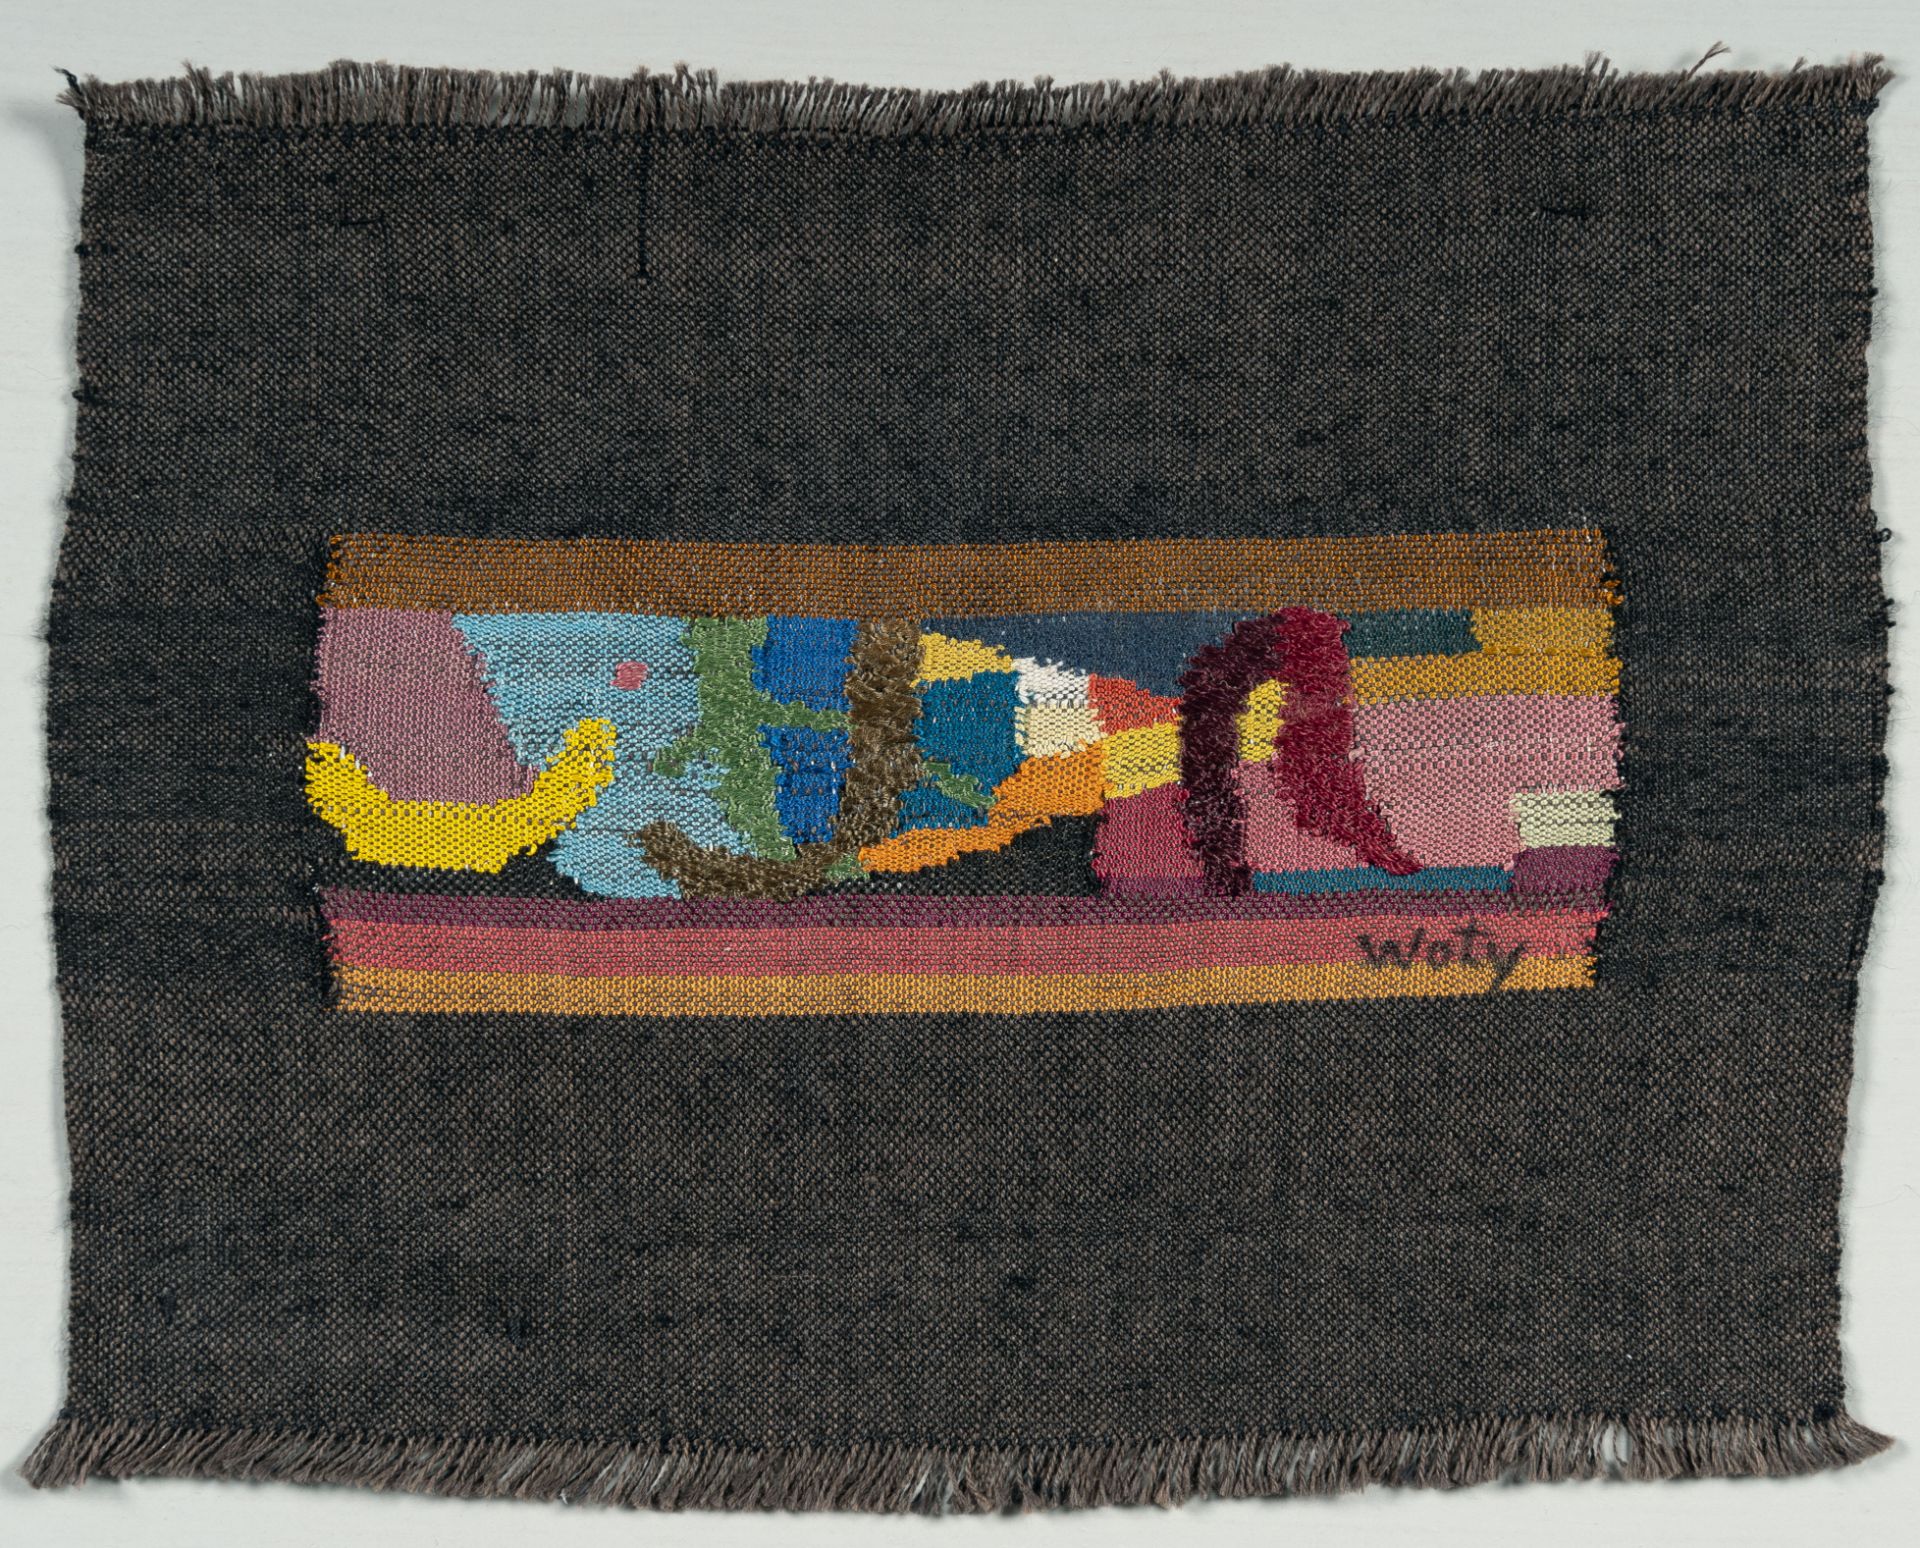 Woty Werner, Small weaving, No. 28.Woven wool. (1954). Ca. 18 x 23 cm. Signed lower right and titled - Image 2 of 3